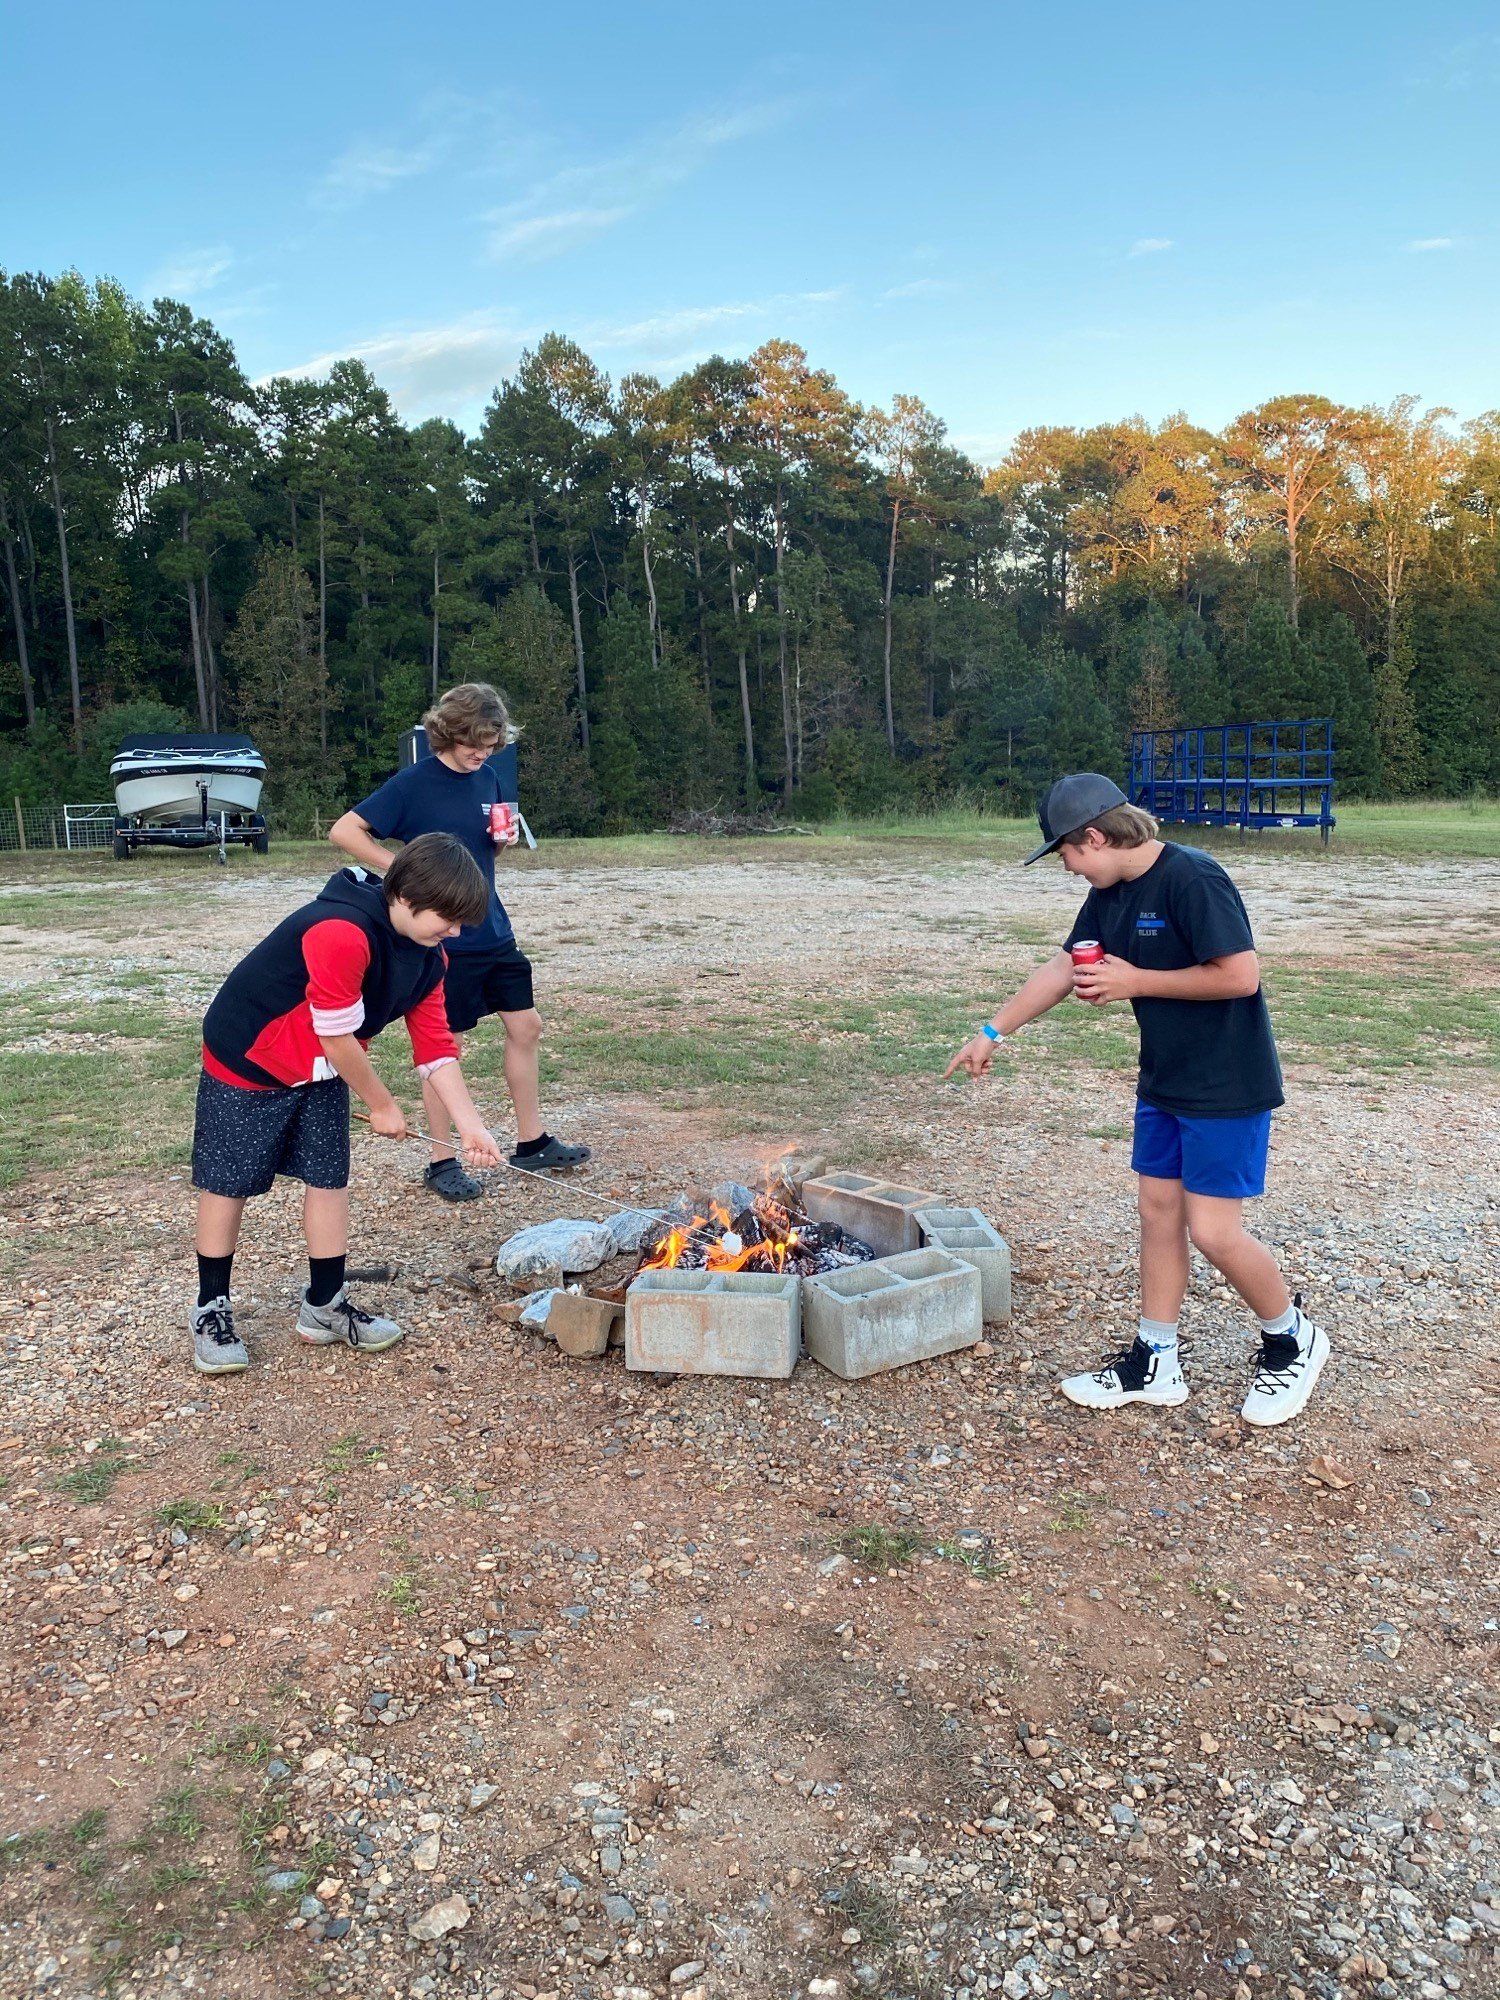 a group of young boys are standing around a fire pit .